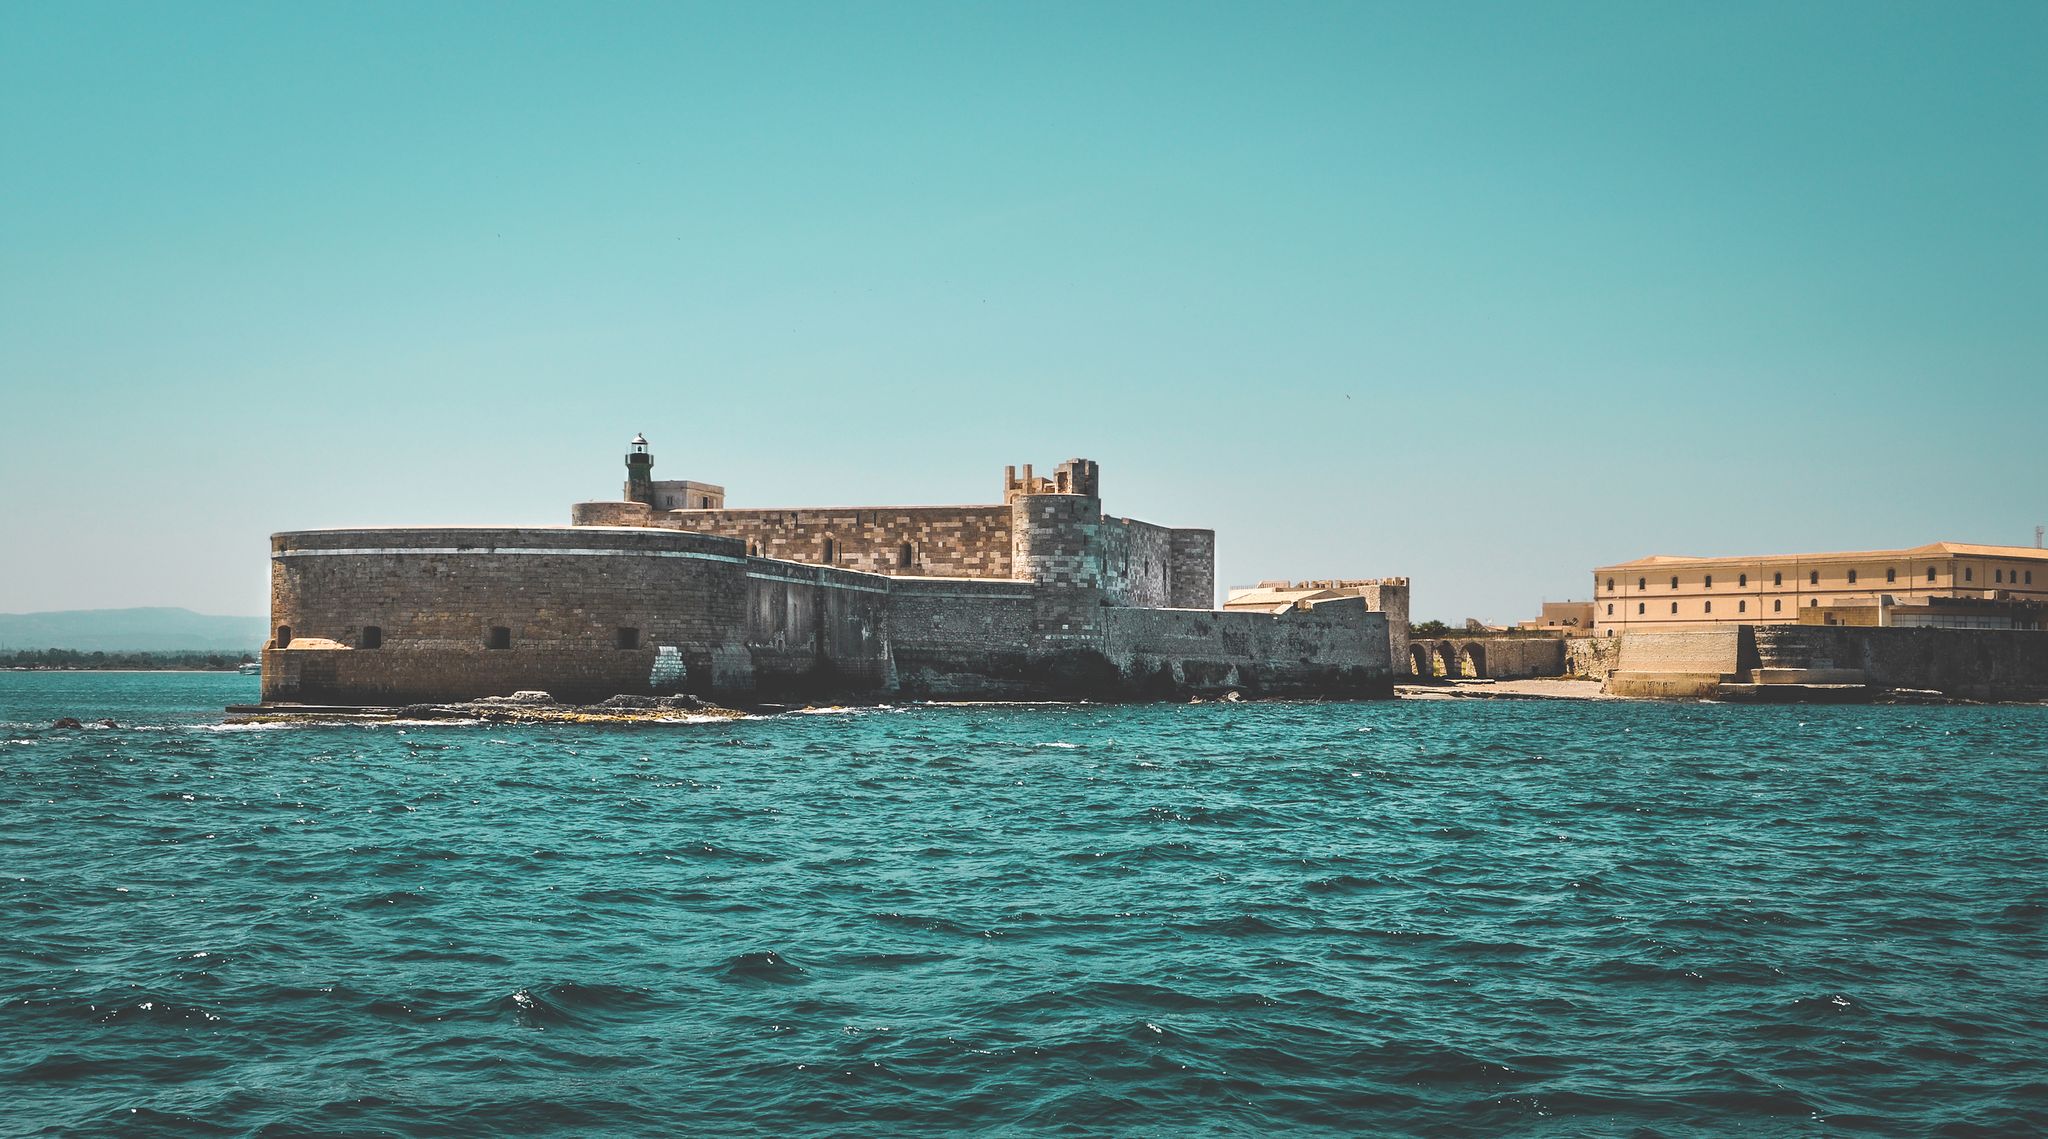 Fortification, Water, Sea, Waterway, Sky, Architecture, Vehicle, Vacation, Tourism, Ocean, 